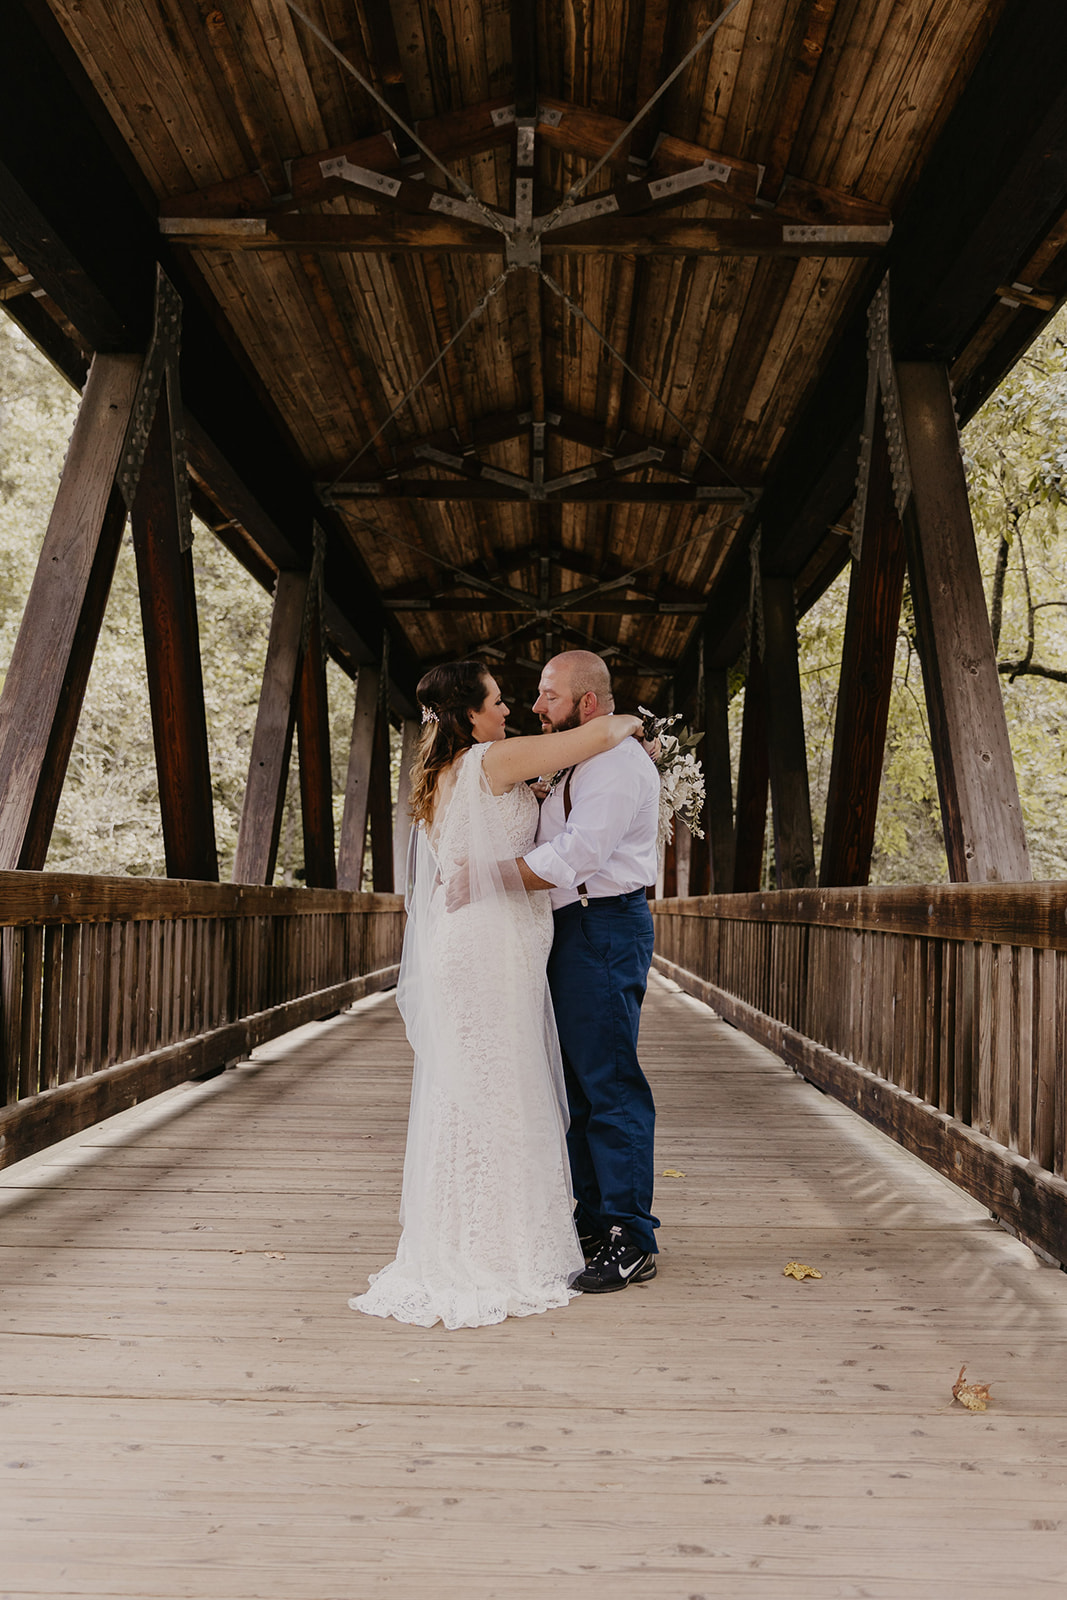 A couple, dressed in wedding attire, embraces on a wooden covered bridge with a backdrop of trees.